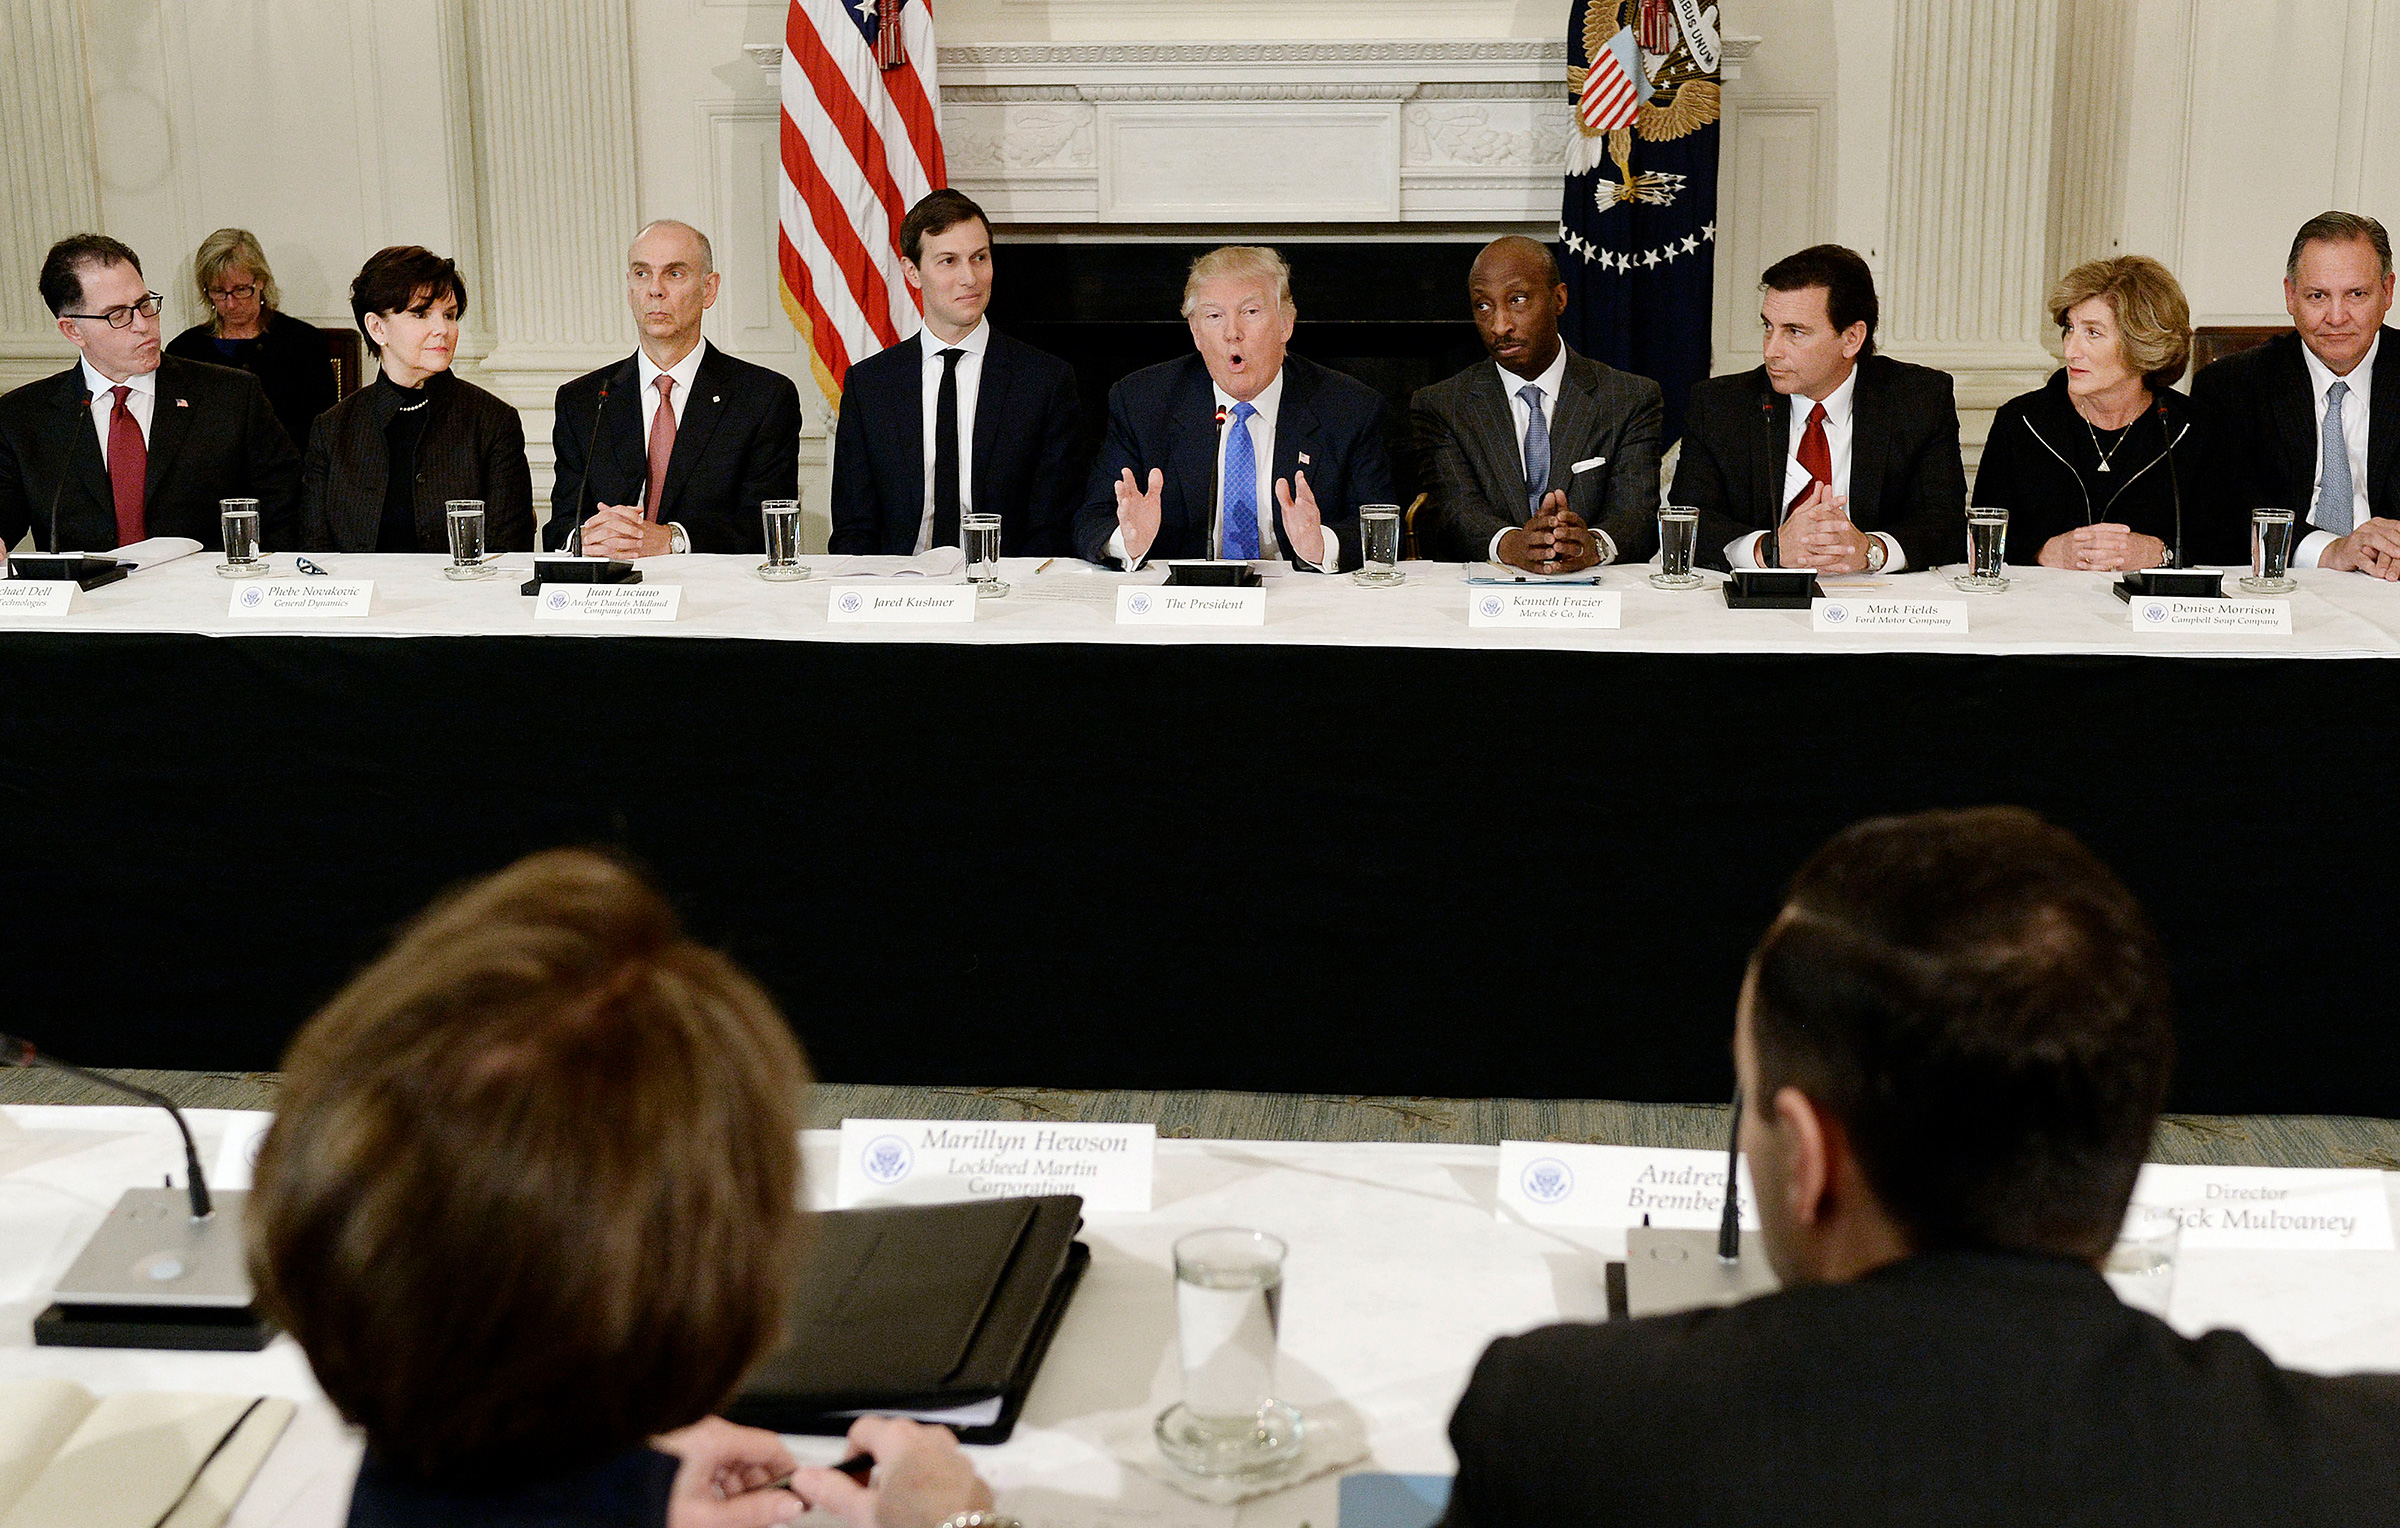 A business council convened by Trump, pictured in February 2017, broke up within months. From left: Michael Dell, Dell; Phebe Novakovic, General Dynamics; Juan Luciano, Archer Daniels Midland; Jared Kushner; Donald Trump; Kenneth Frazier, Merck; Mark Fields, Ford; Denise Morrison, Campbell Soup; Greg Hayes, United Technologies.